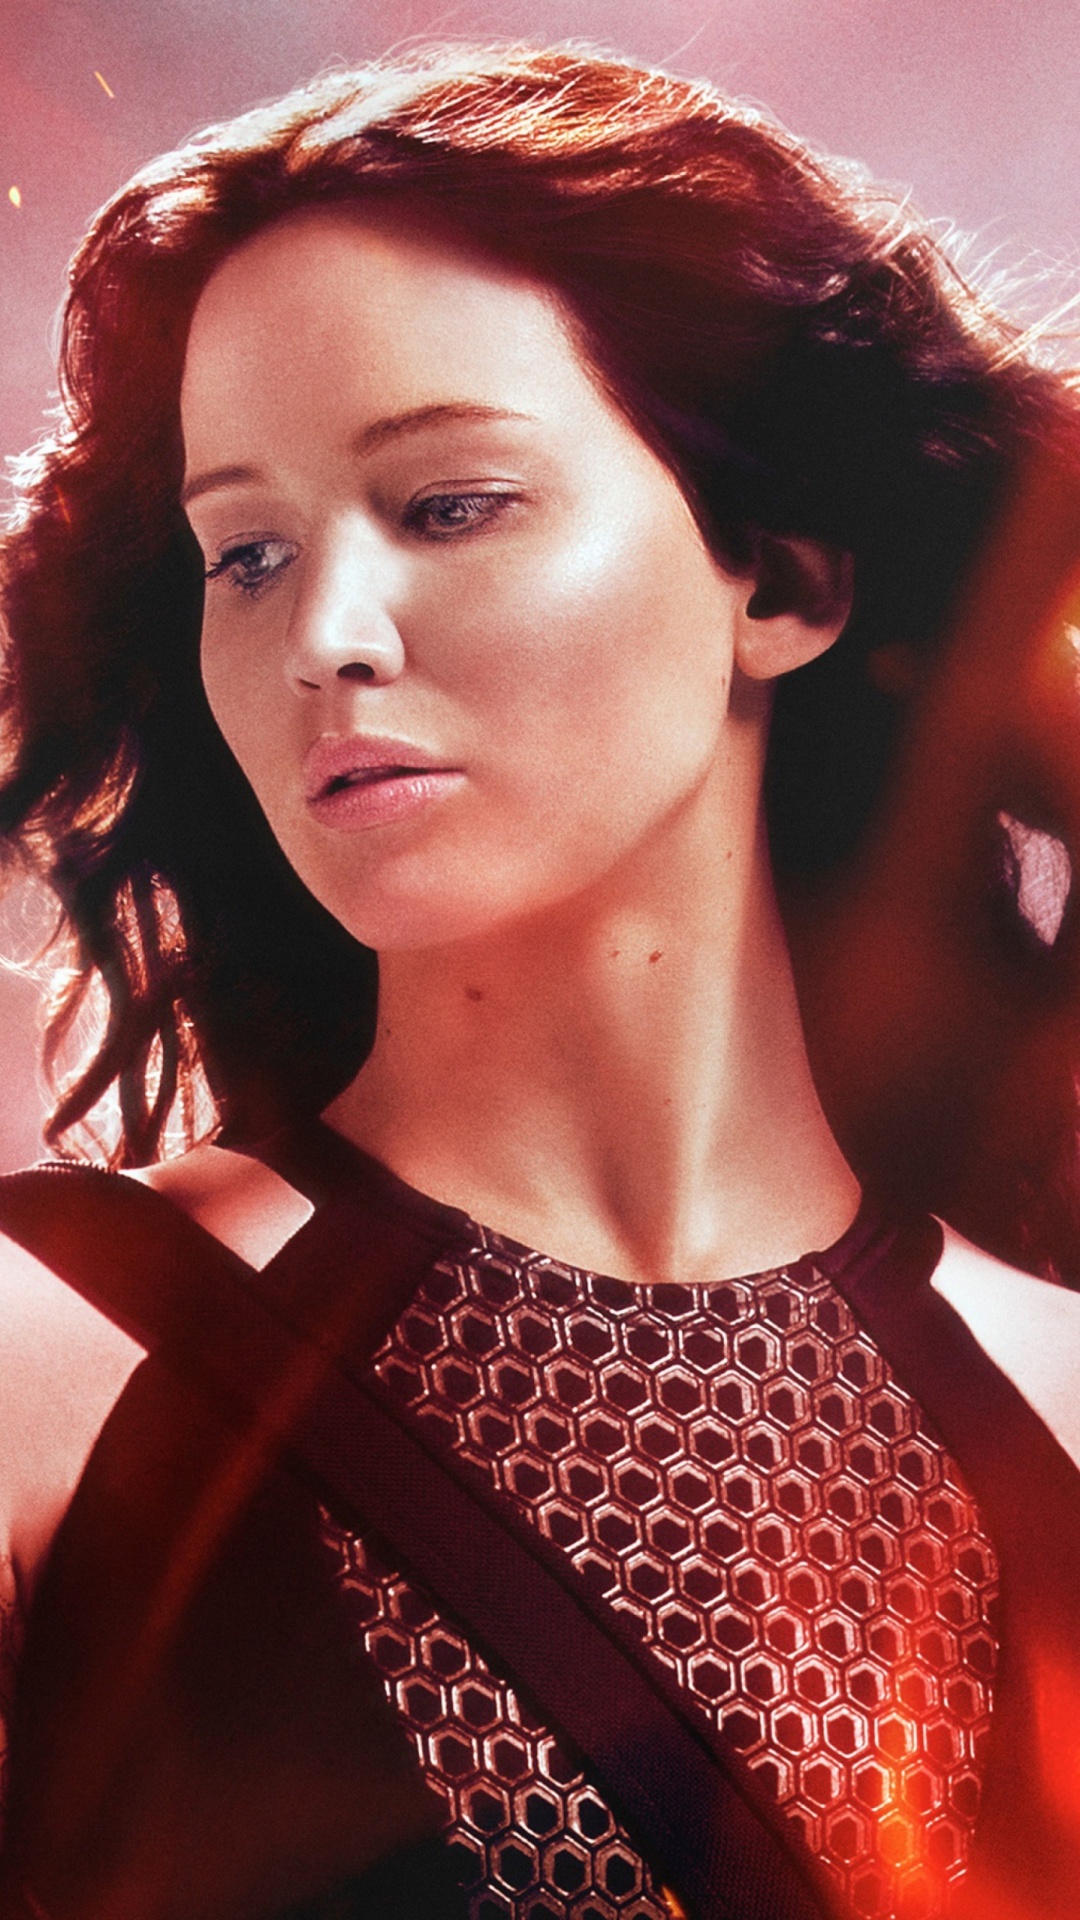 Hunger Games: Katniss, Catching Fire, The film has grossed over $865 million worldwide. 1080x1920 Full HD Wallpaper.